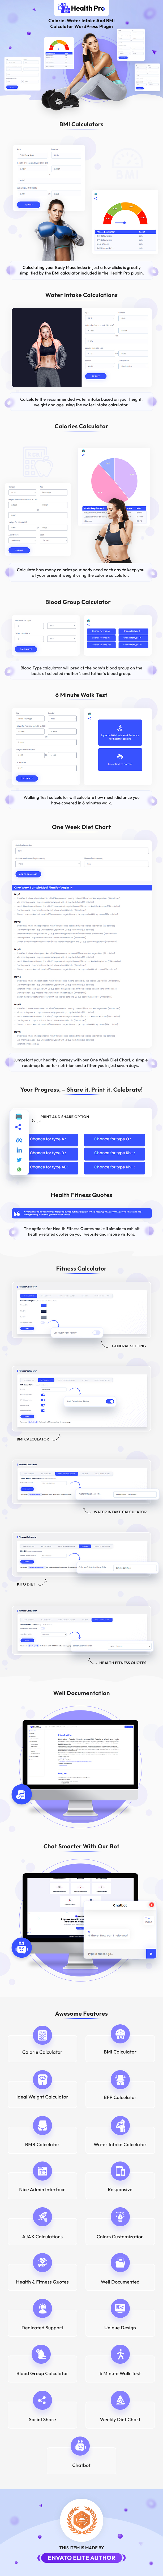 Health Pro - Calorie, Water Intake, BMI Calculator with AI Chatbot Assistant WordPress Plugin - 2